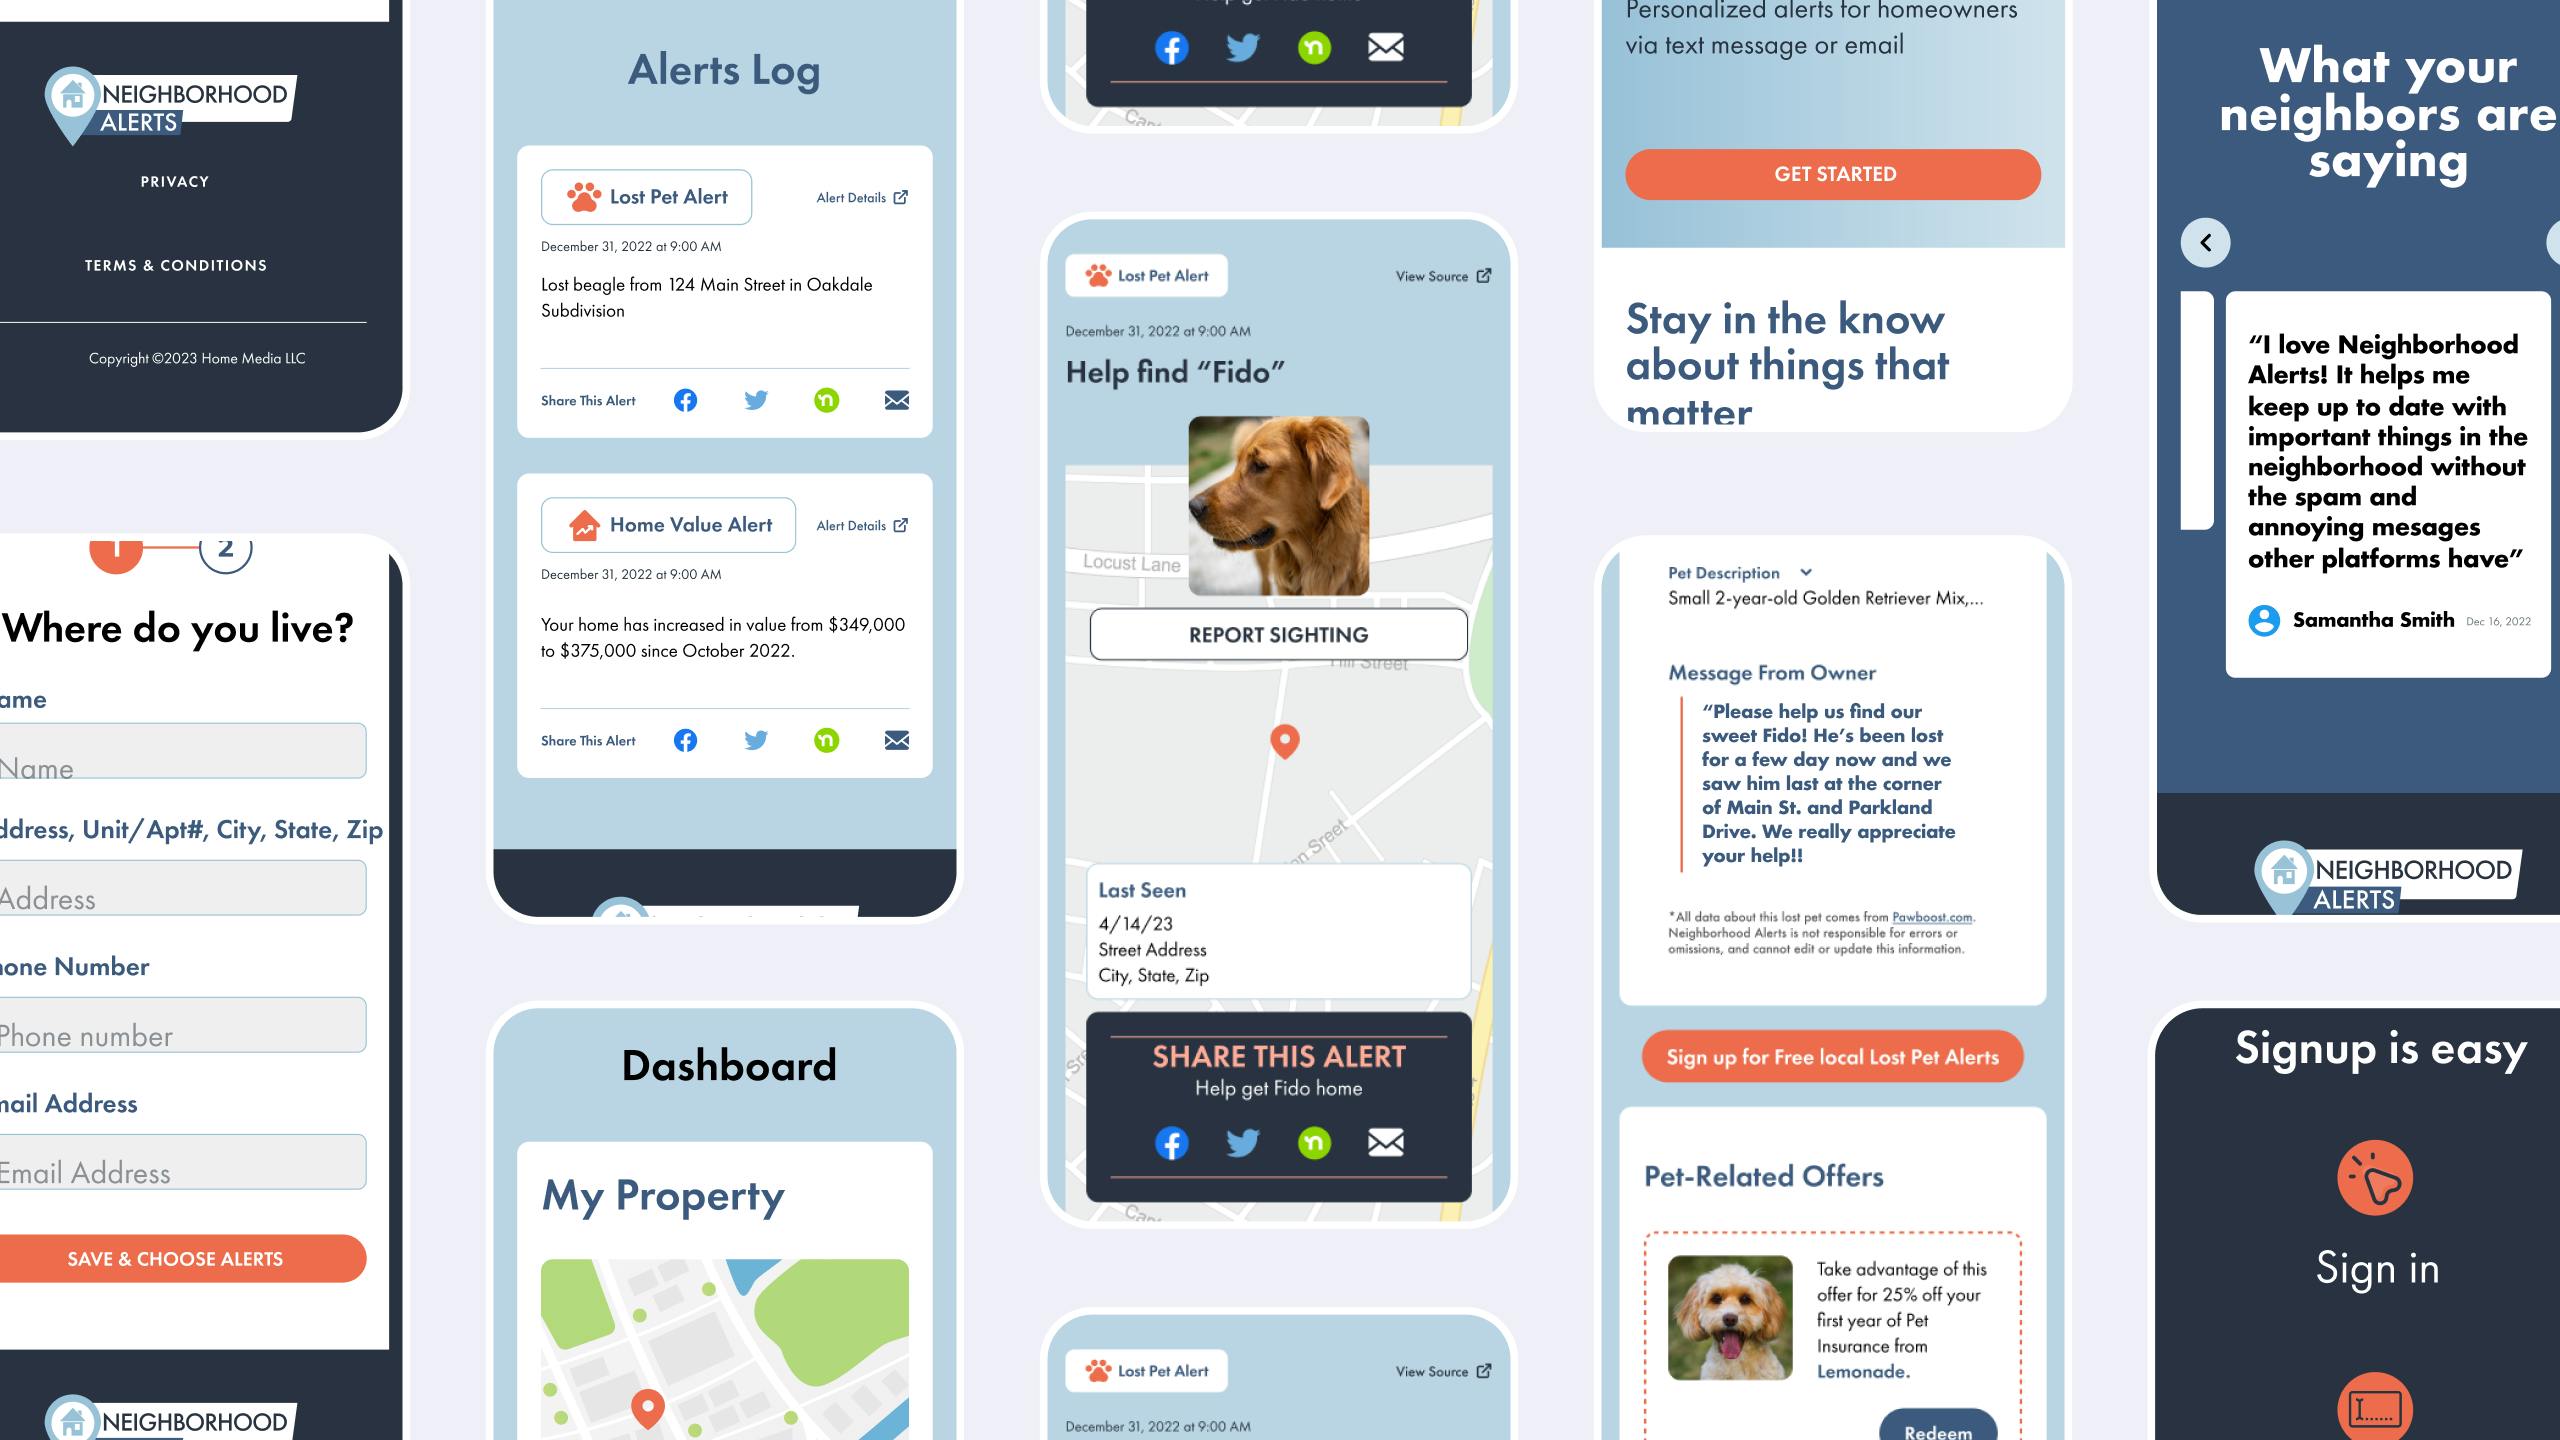 Screenshots of the Neighborhood Alerts app arranged in a grid. They show different pages of the product.